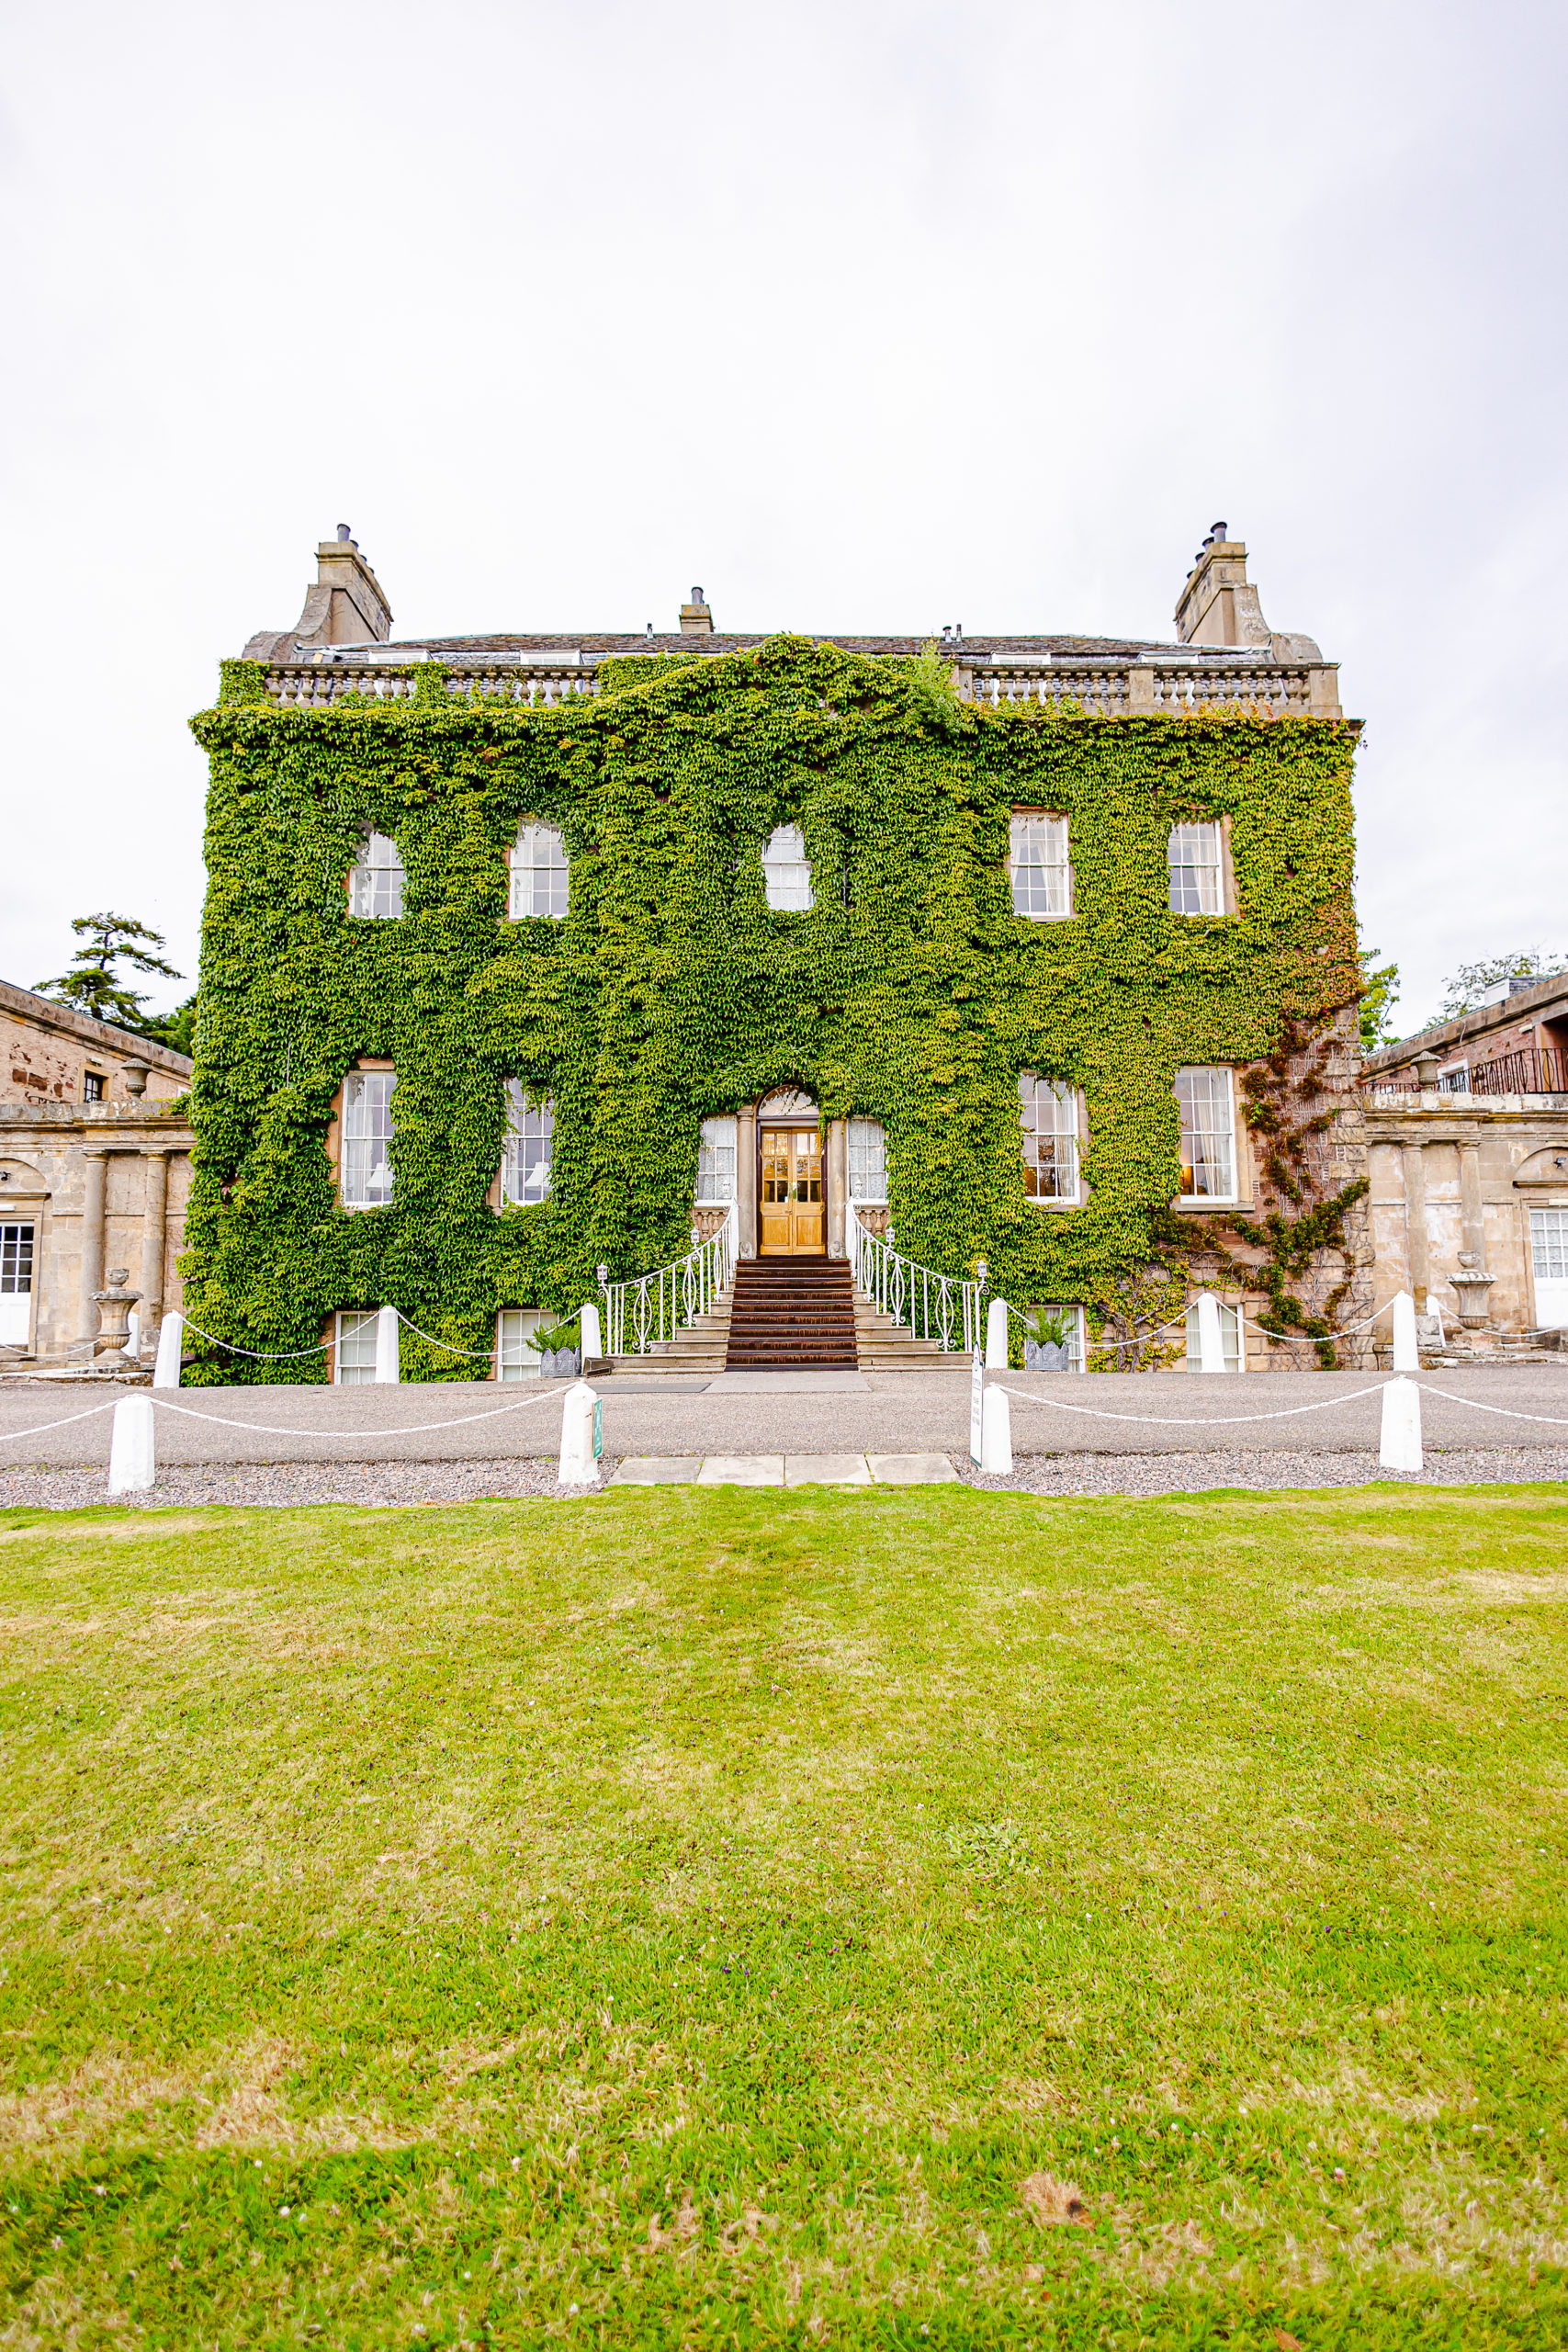 Culloden House covered in ivy